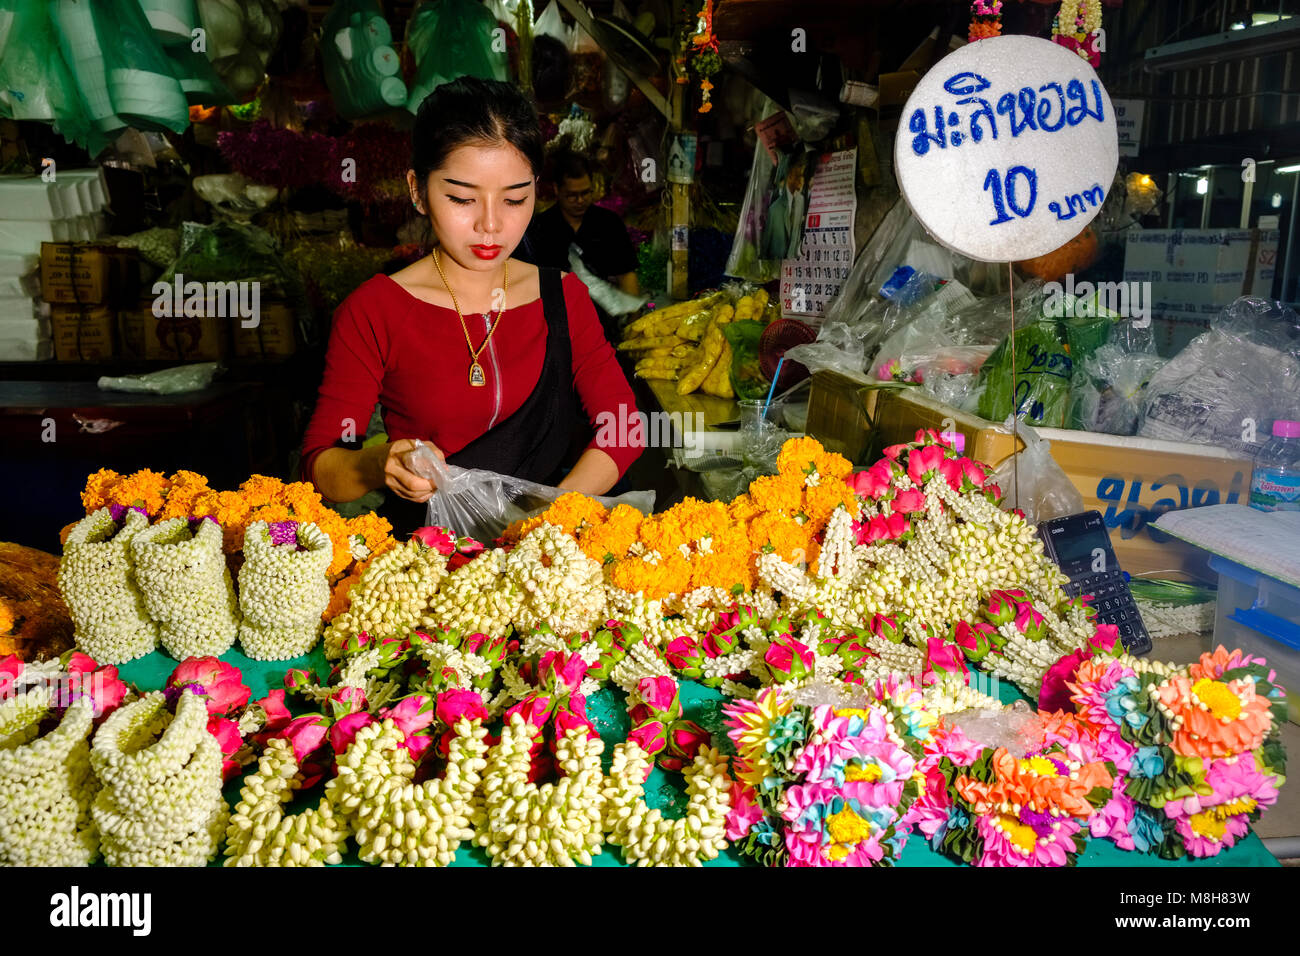 A young woman is arranging flowers and blossoms at the 24 hours flower market Stock Photo